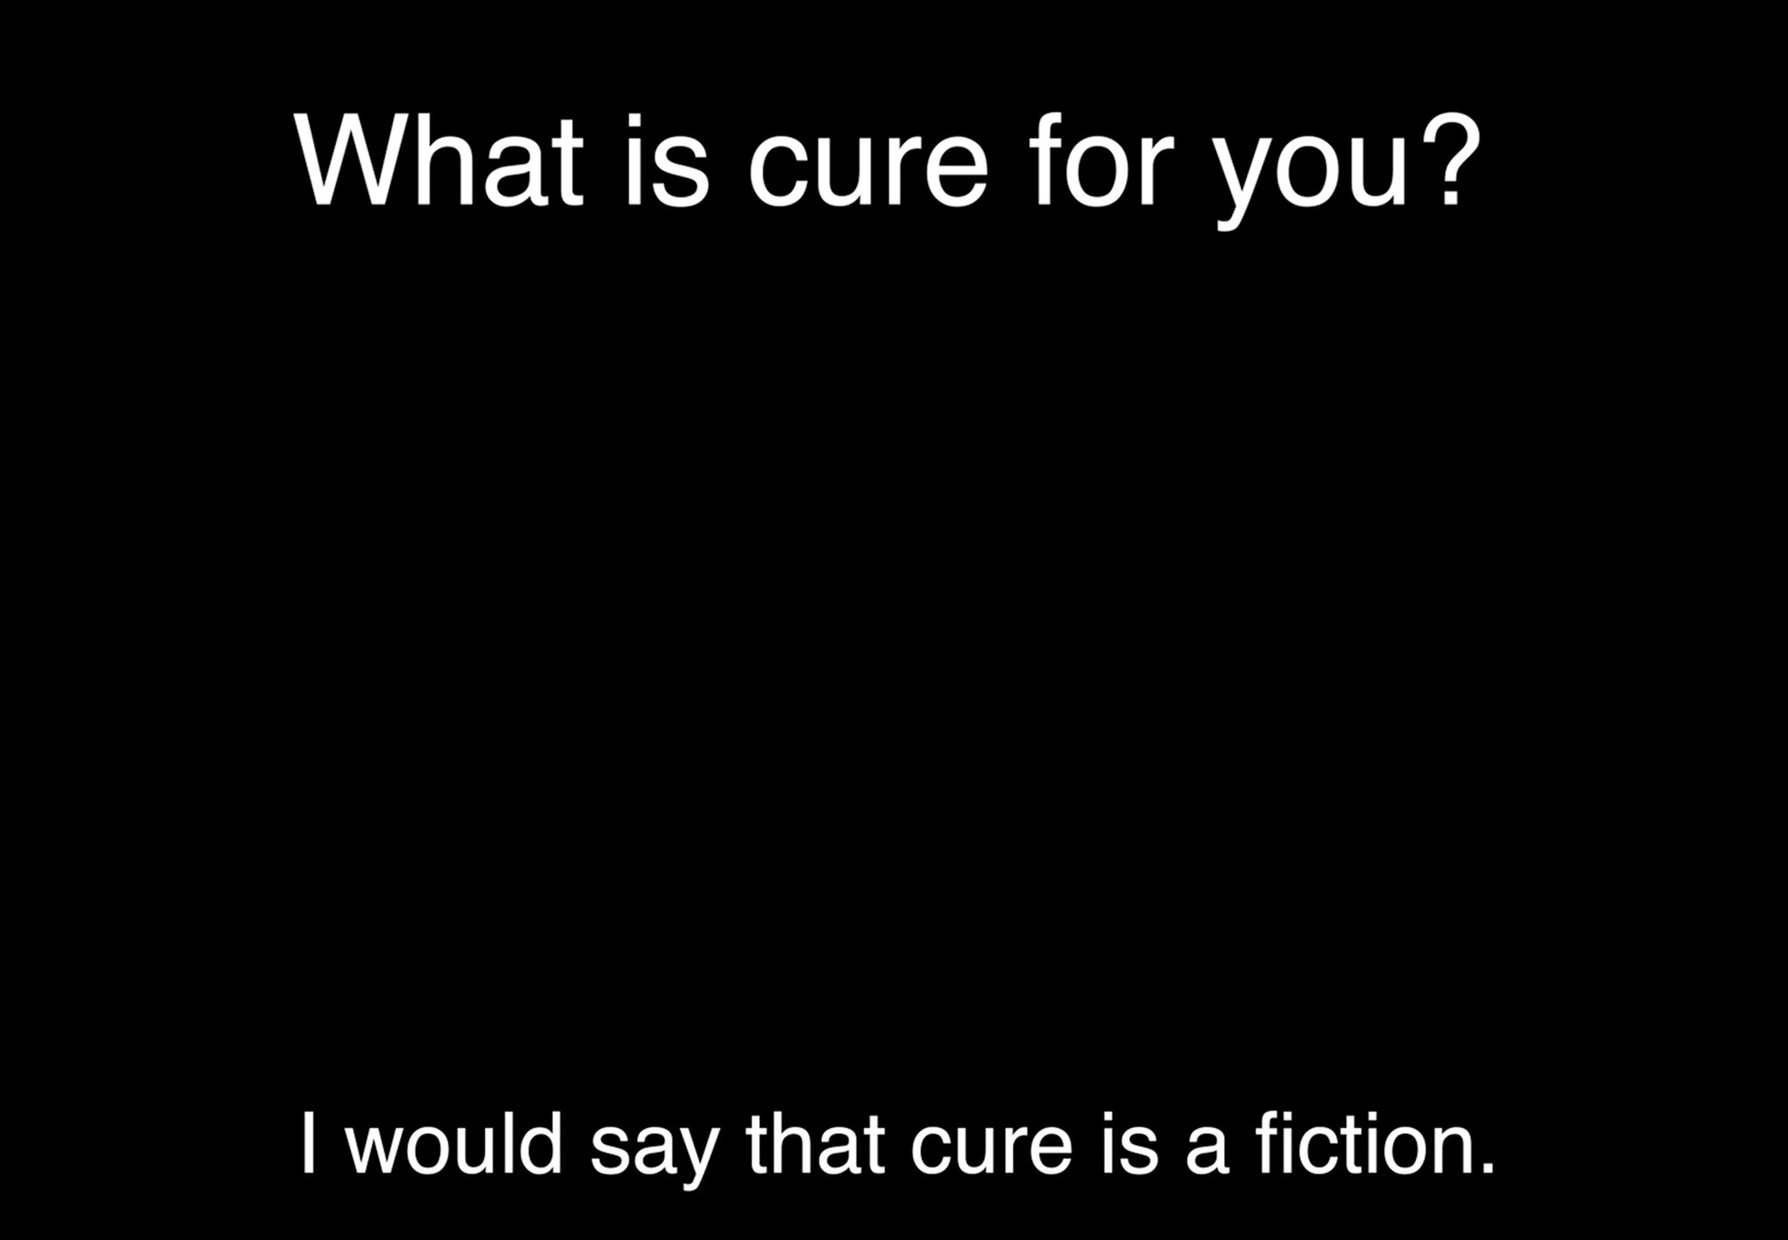 A video still from “Perspective” comprised of white text on a black background. At the top of the still is the question, “What is cure for you?” At the bottom of the still is the response, “I would say that cure is a fiction.”